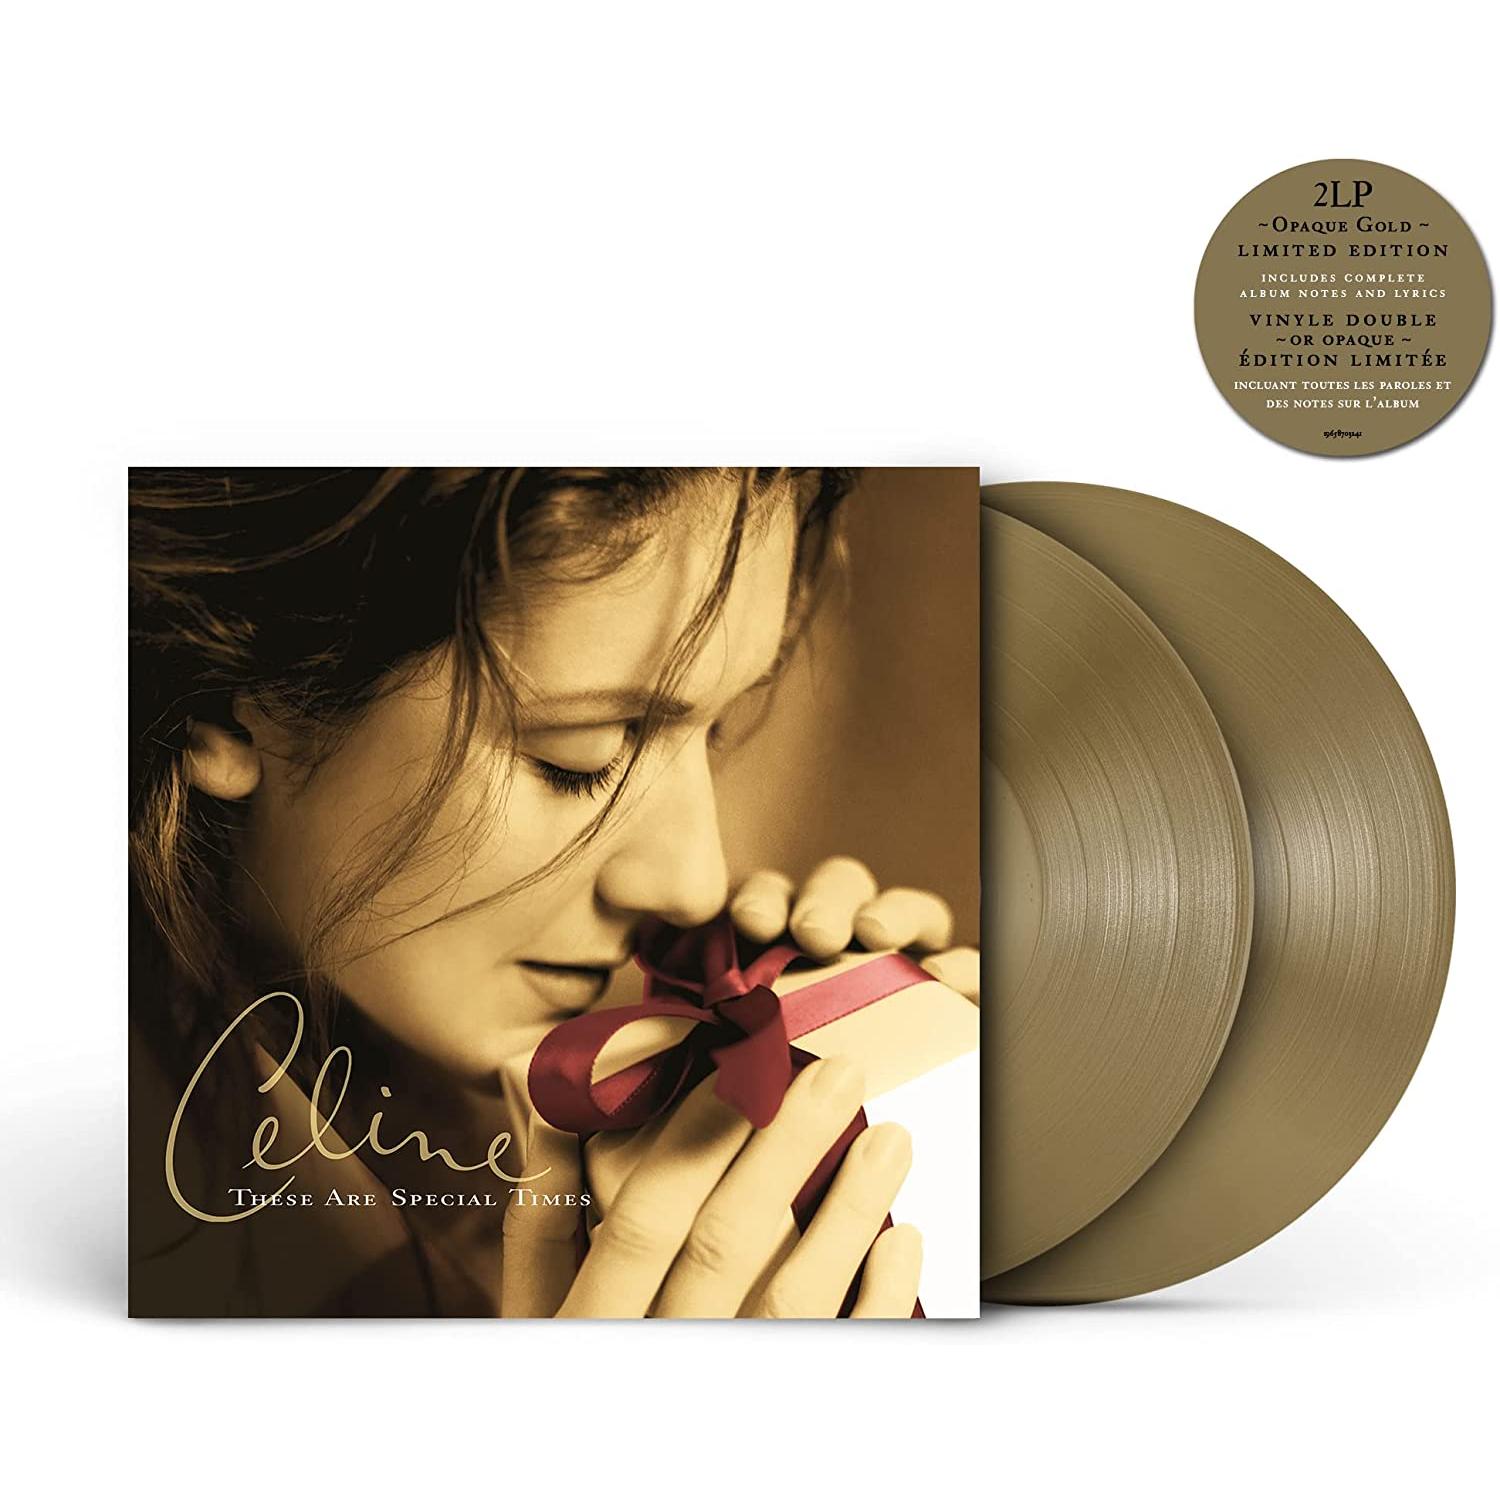 These Are Special Times (Vinyl Gold)